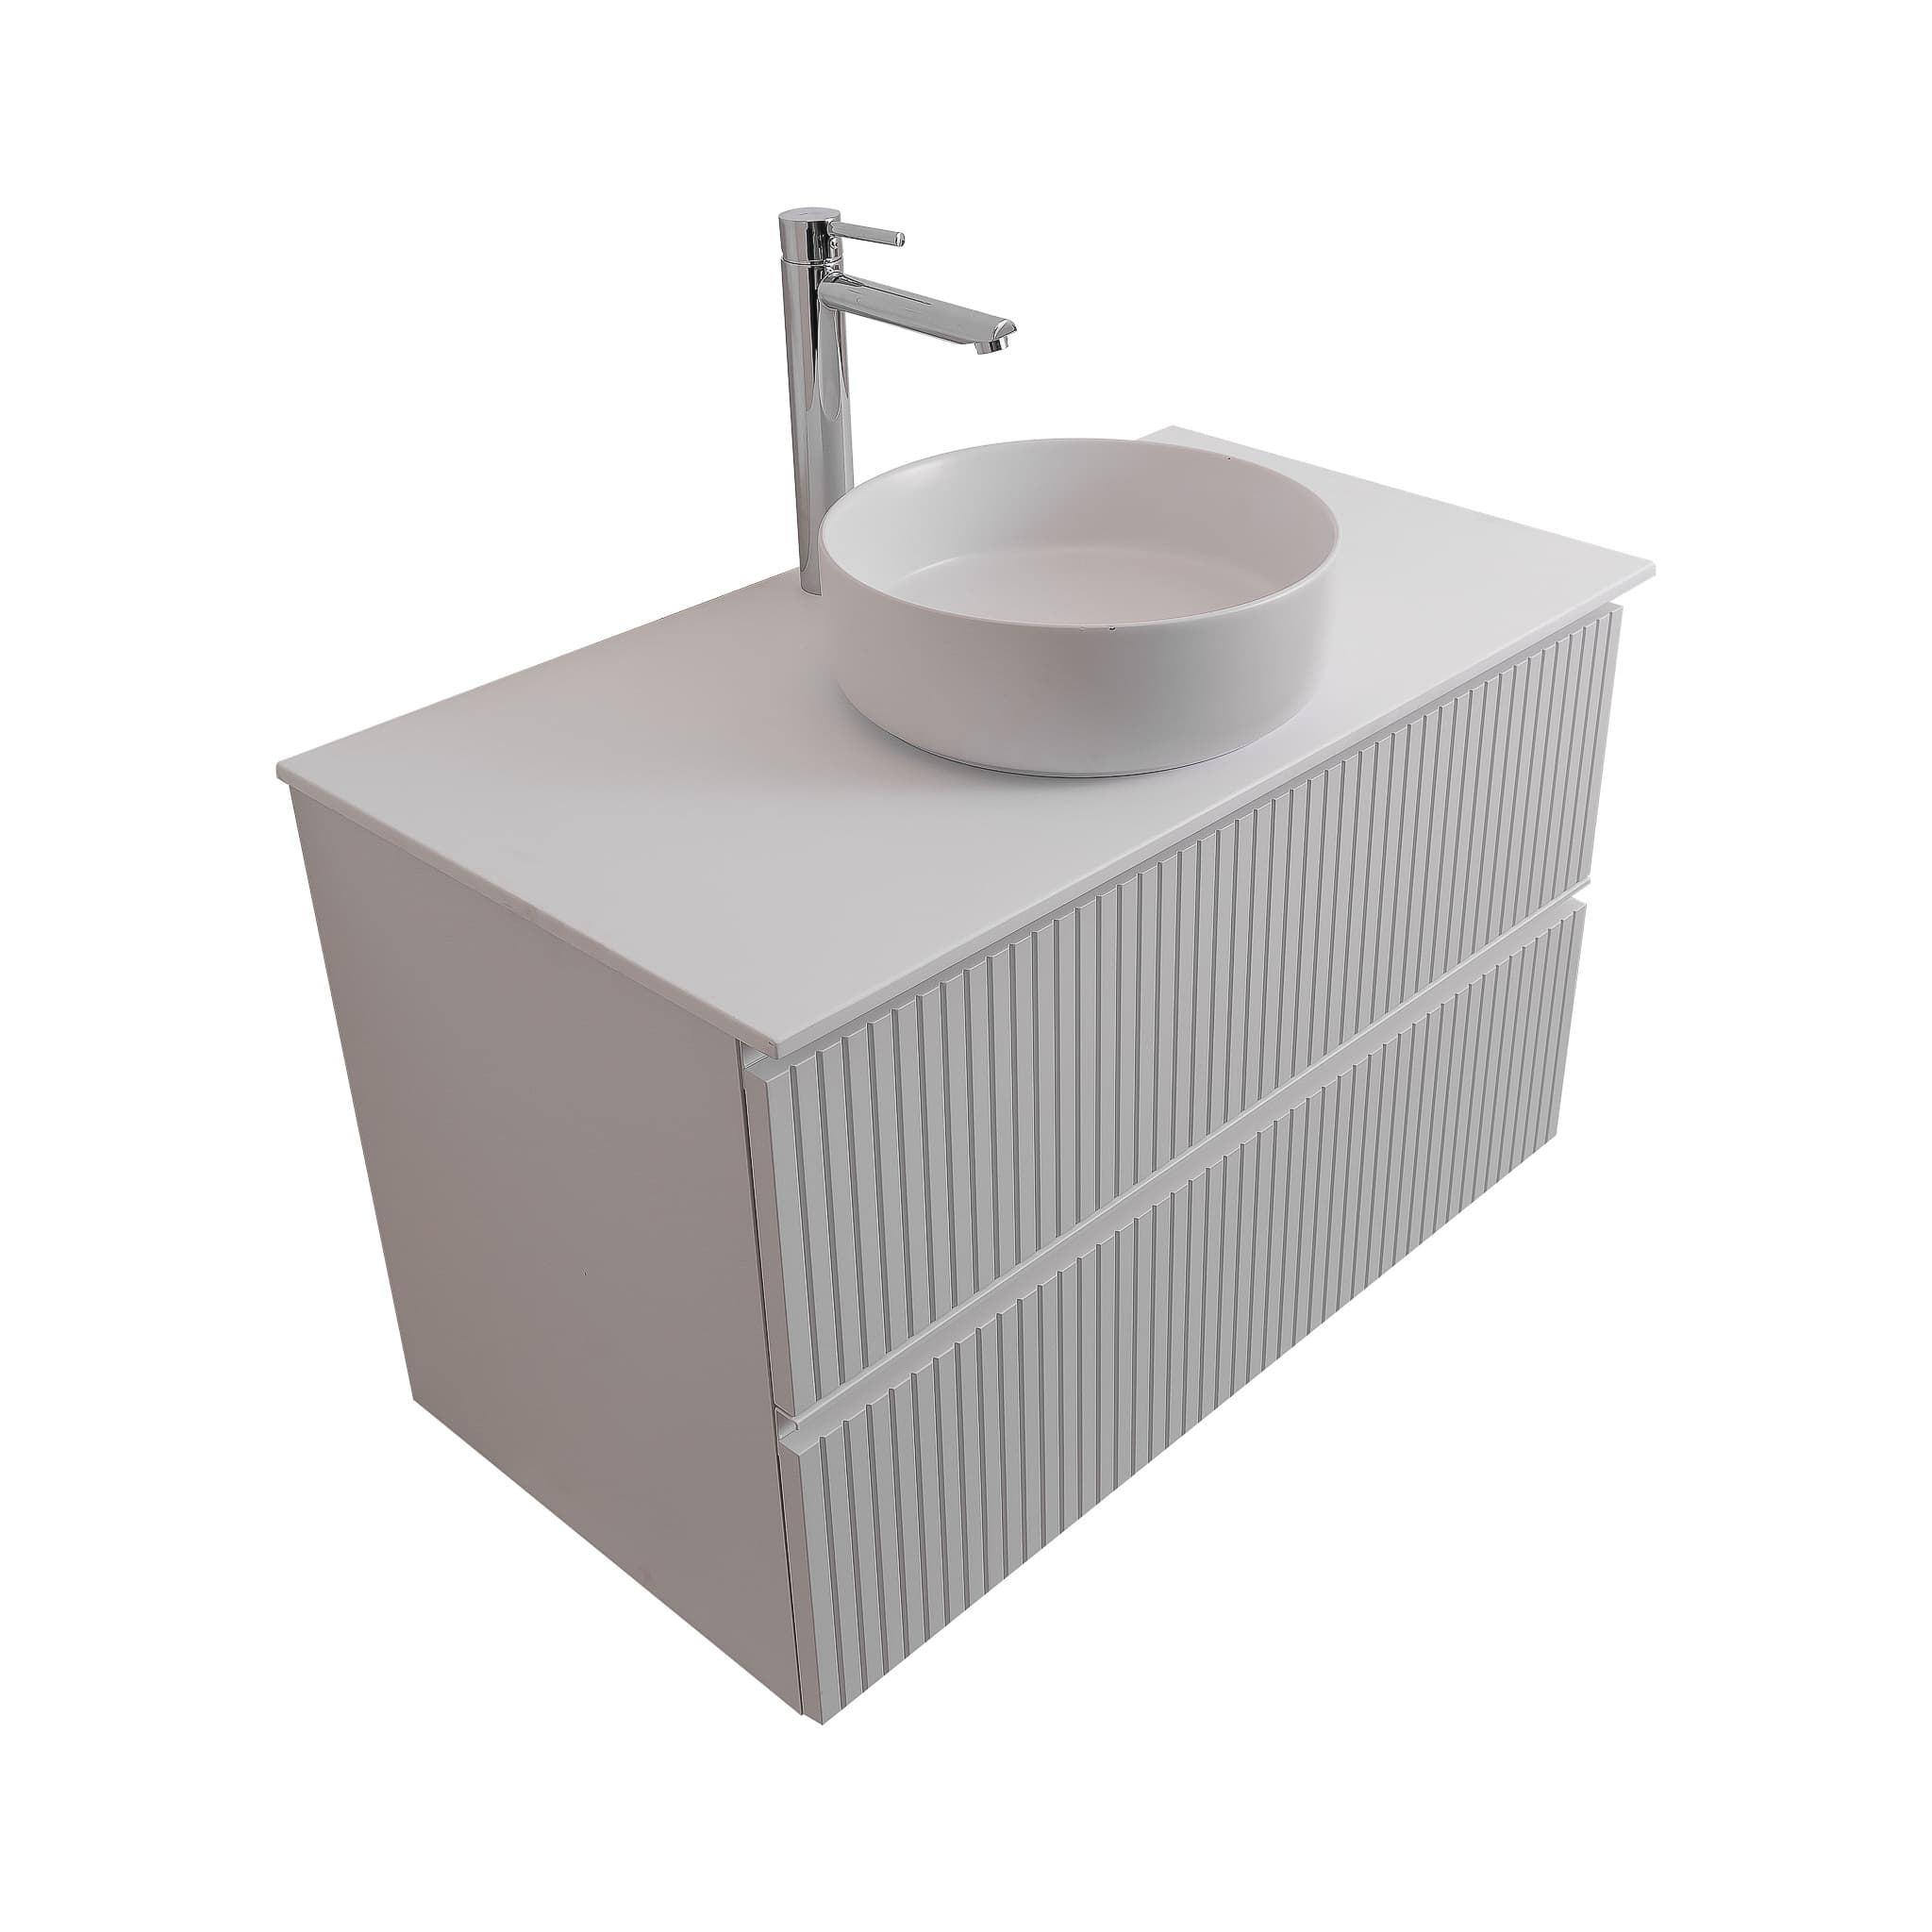 Ares 35.5 Matte White Cabinet, Ares White Top And Ares White Ceramic Basin, Wall Mounted Modern Vanity Set